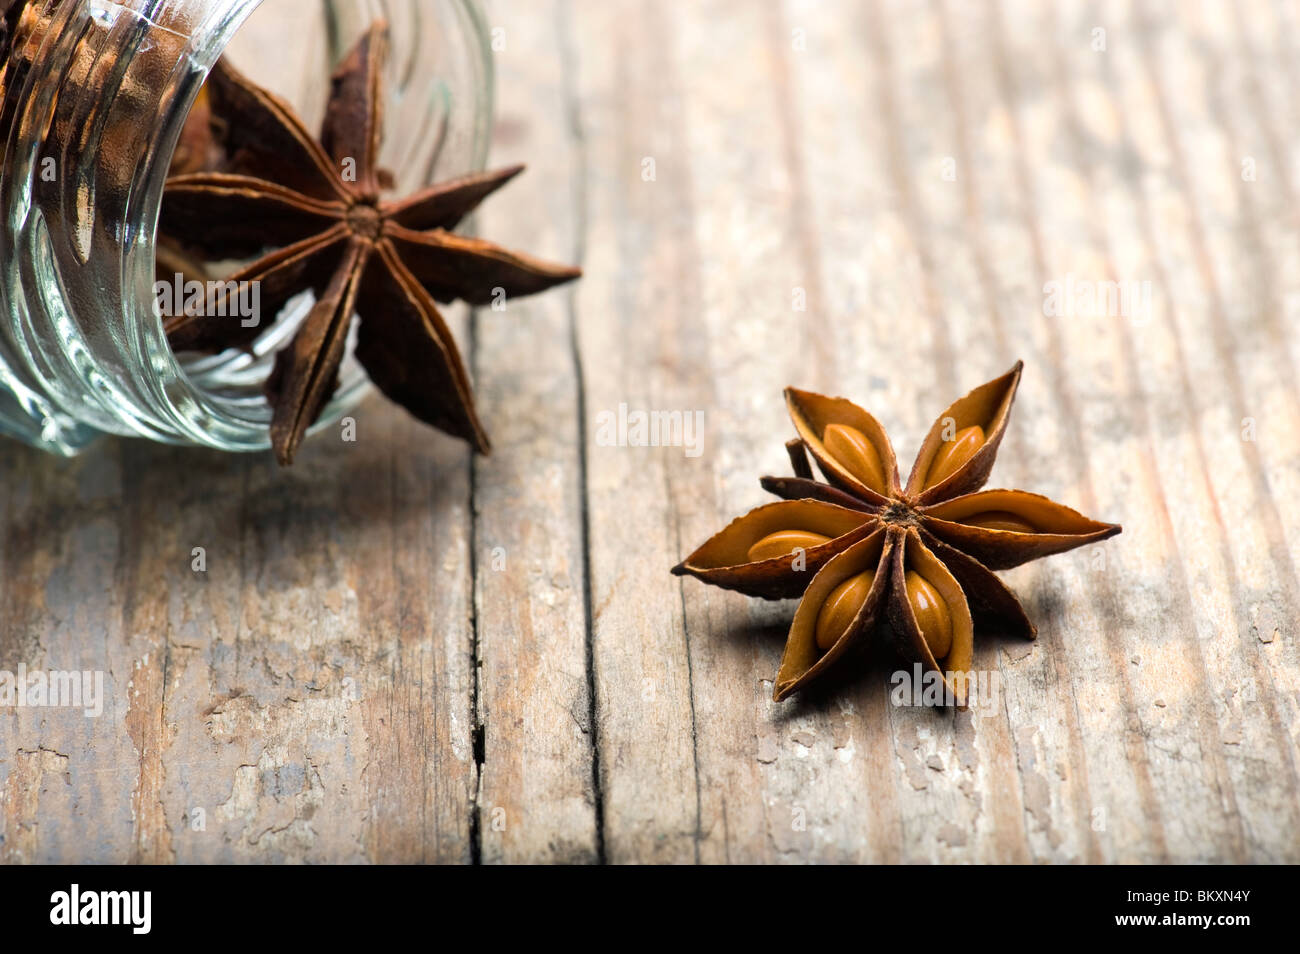 Star Anise (Illicium verum) Spilling Out Of  Jar On A Wooden Kitchen Table Stock Photo